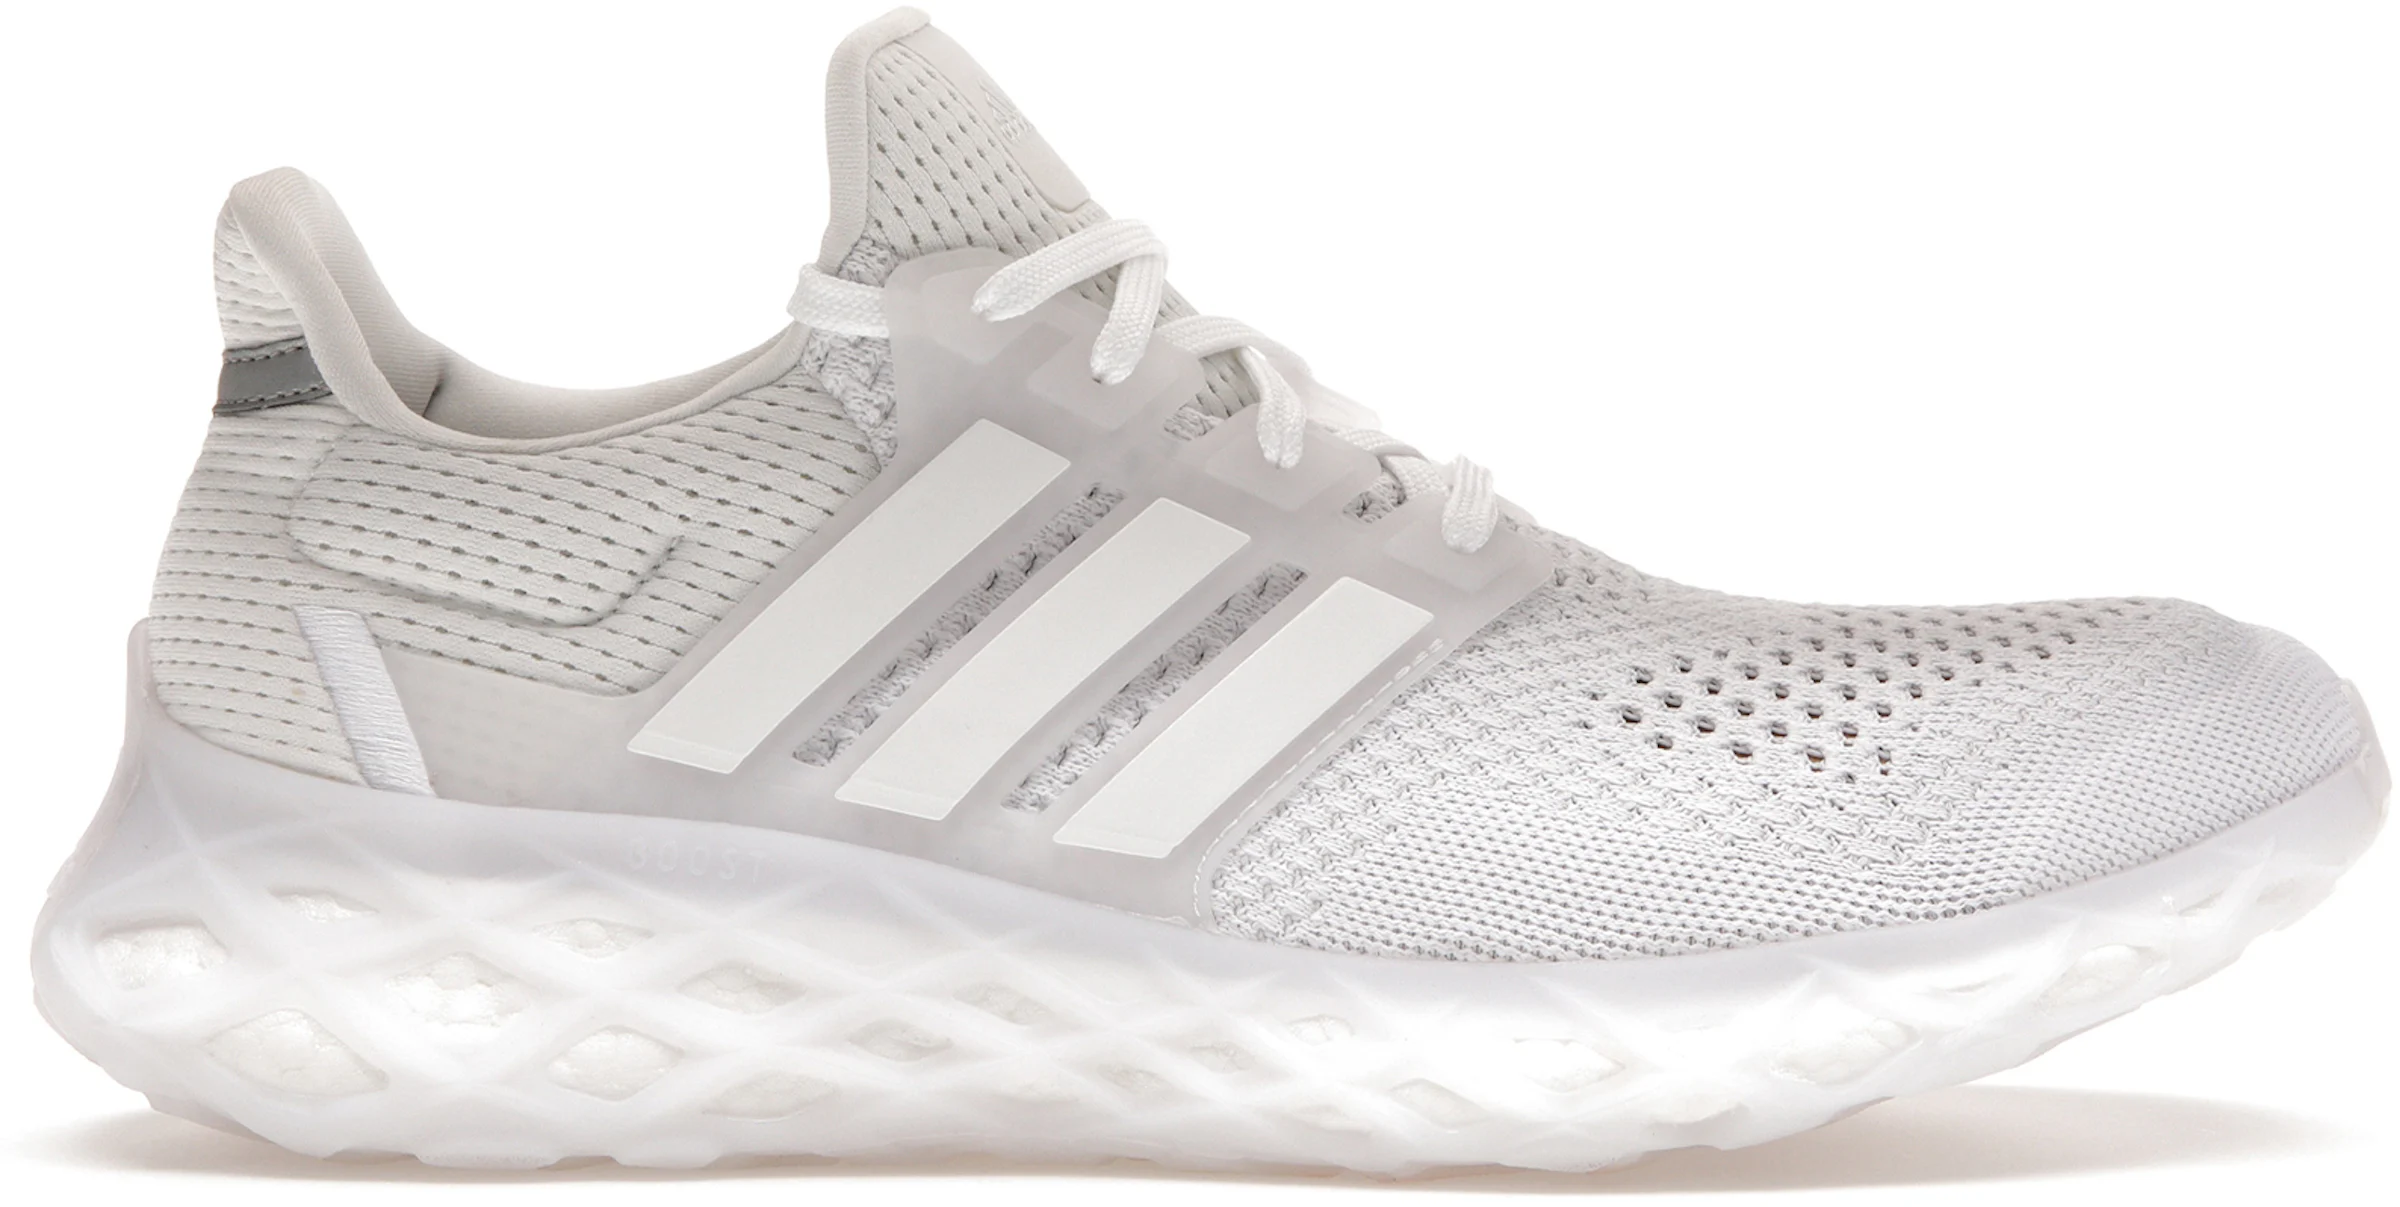 adidas Ultra Boost Web DNA Cloud White Grey - GY4167 - US